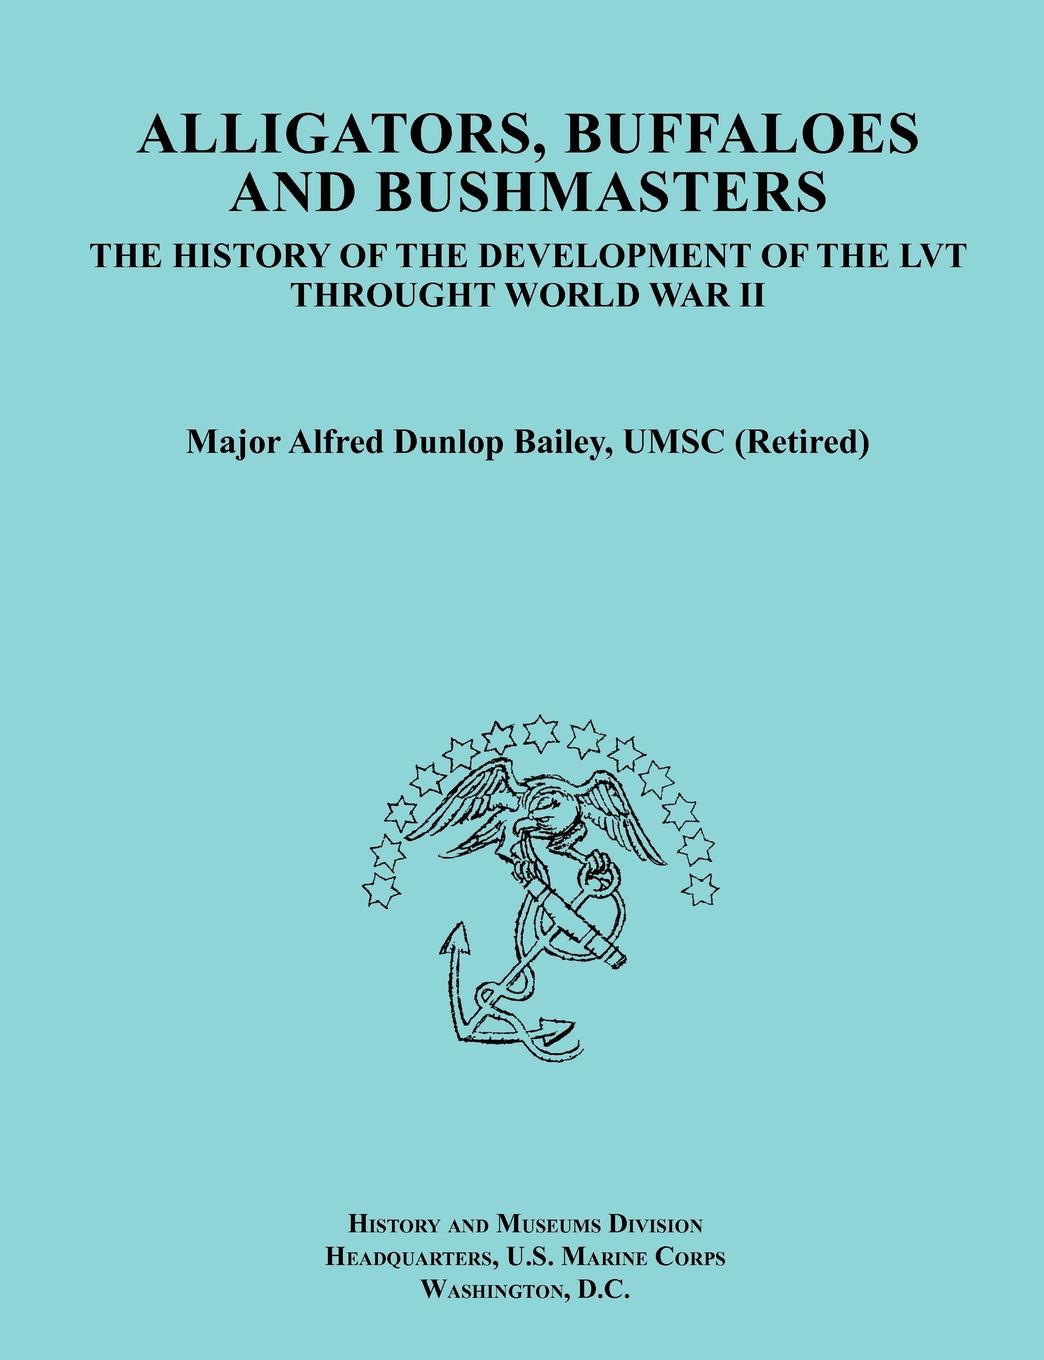 Alligators, Buffaloes, and Bushmasters. The History of the Development of the Lvt Through World War II (Ocassional Paper Series, United States Marine